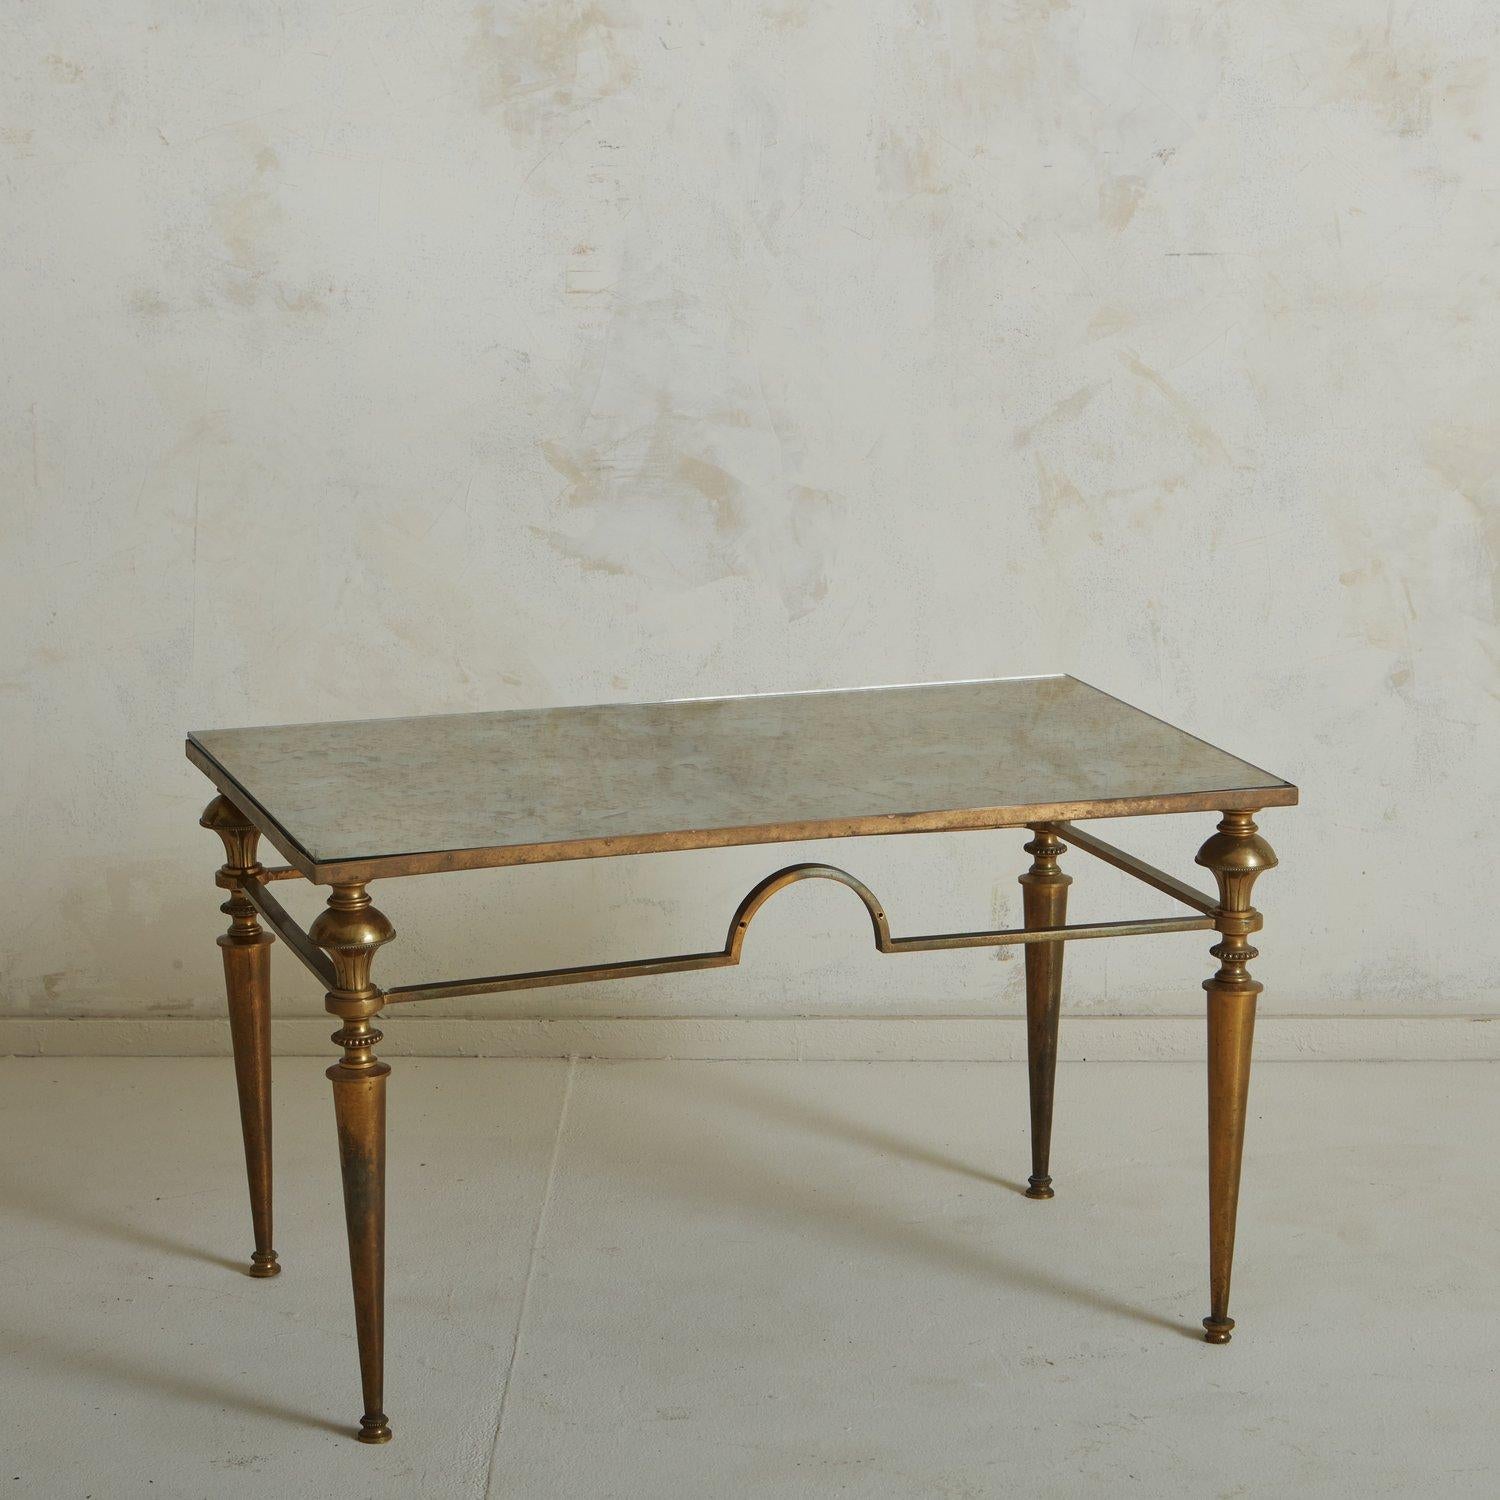 A 1960s French coffee table featuring an intricate patinated brass base with tapered legs and a demilune stretcher detail. It has a beautiful antiqued mirror top. Sourced in France, 1960s. 

